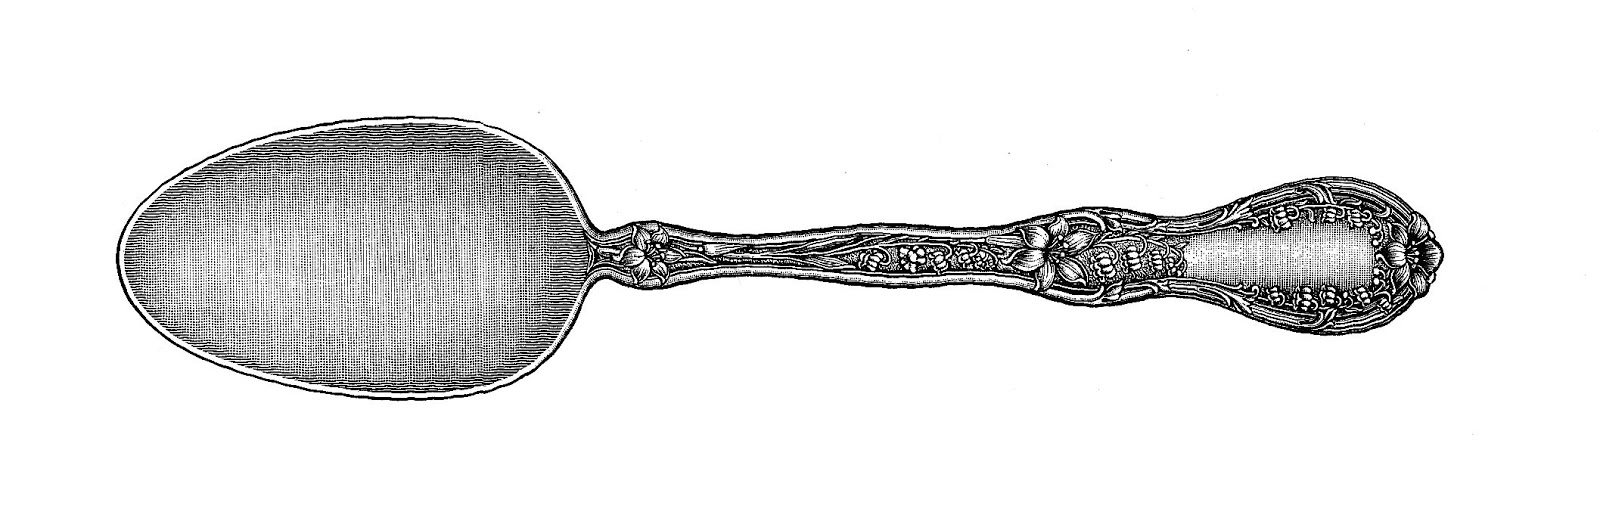 Fancy fork clipart black and white